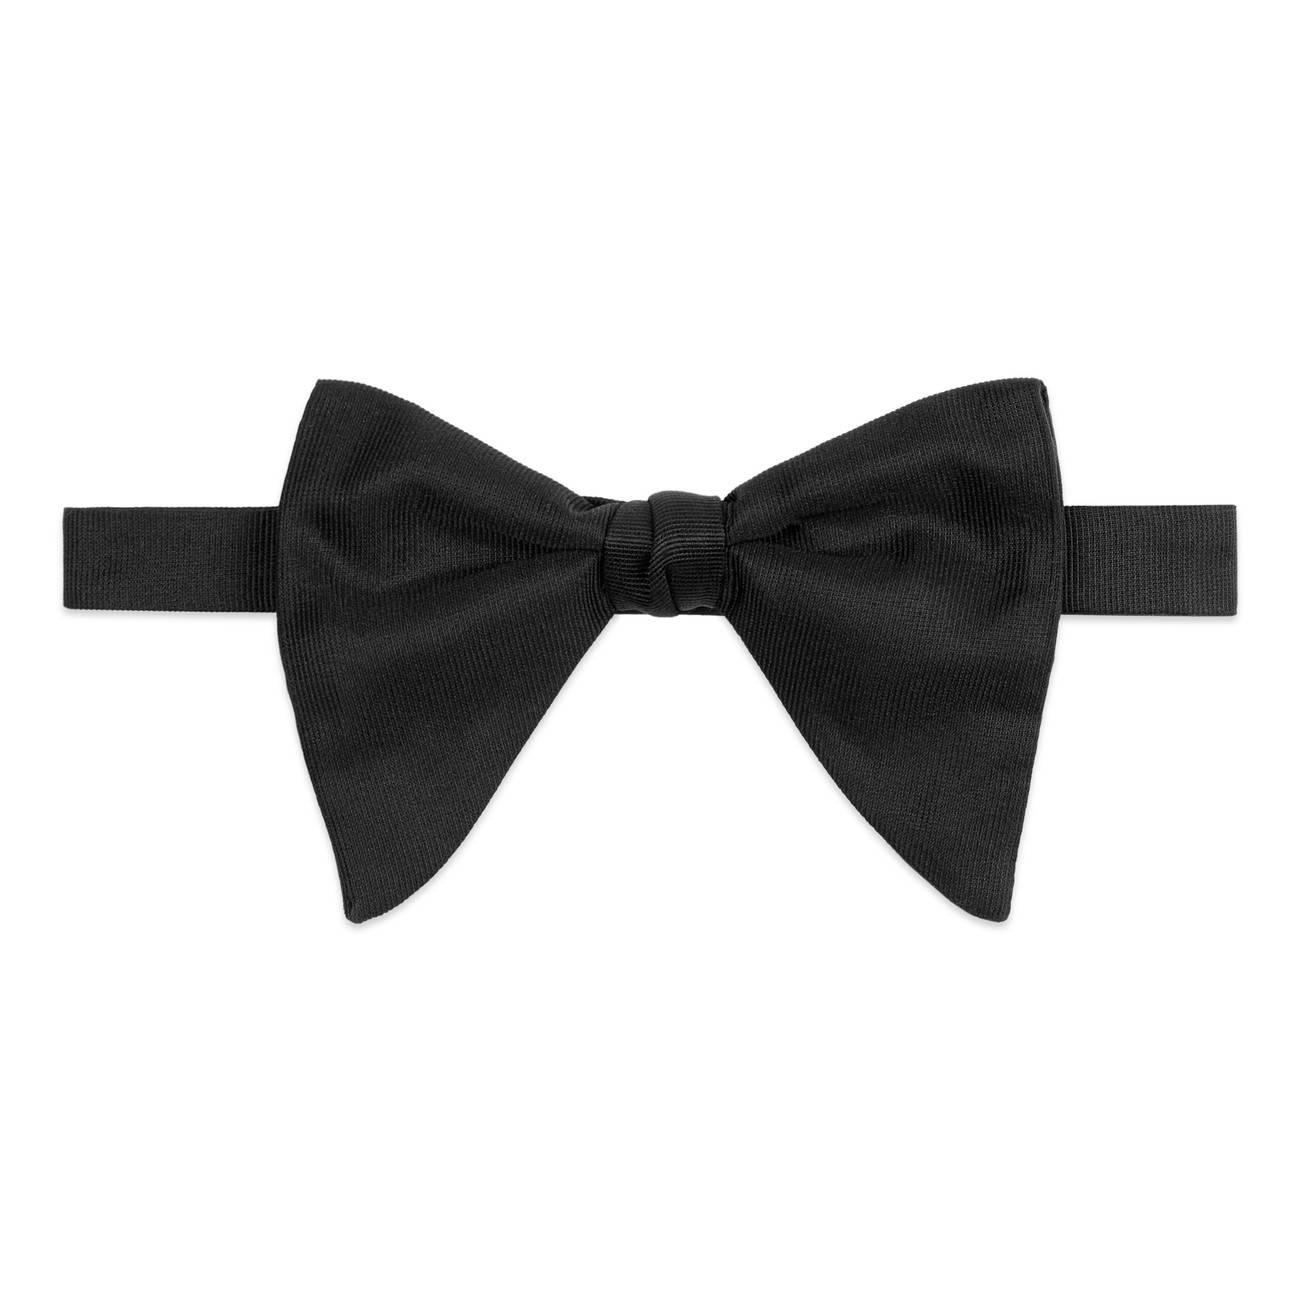 Lyst - Gucci Long Silk Faille Bow Tie in Black for Men - Save 5. ...